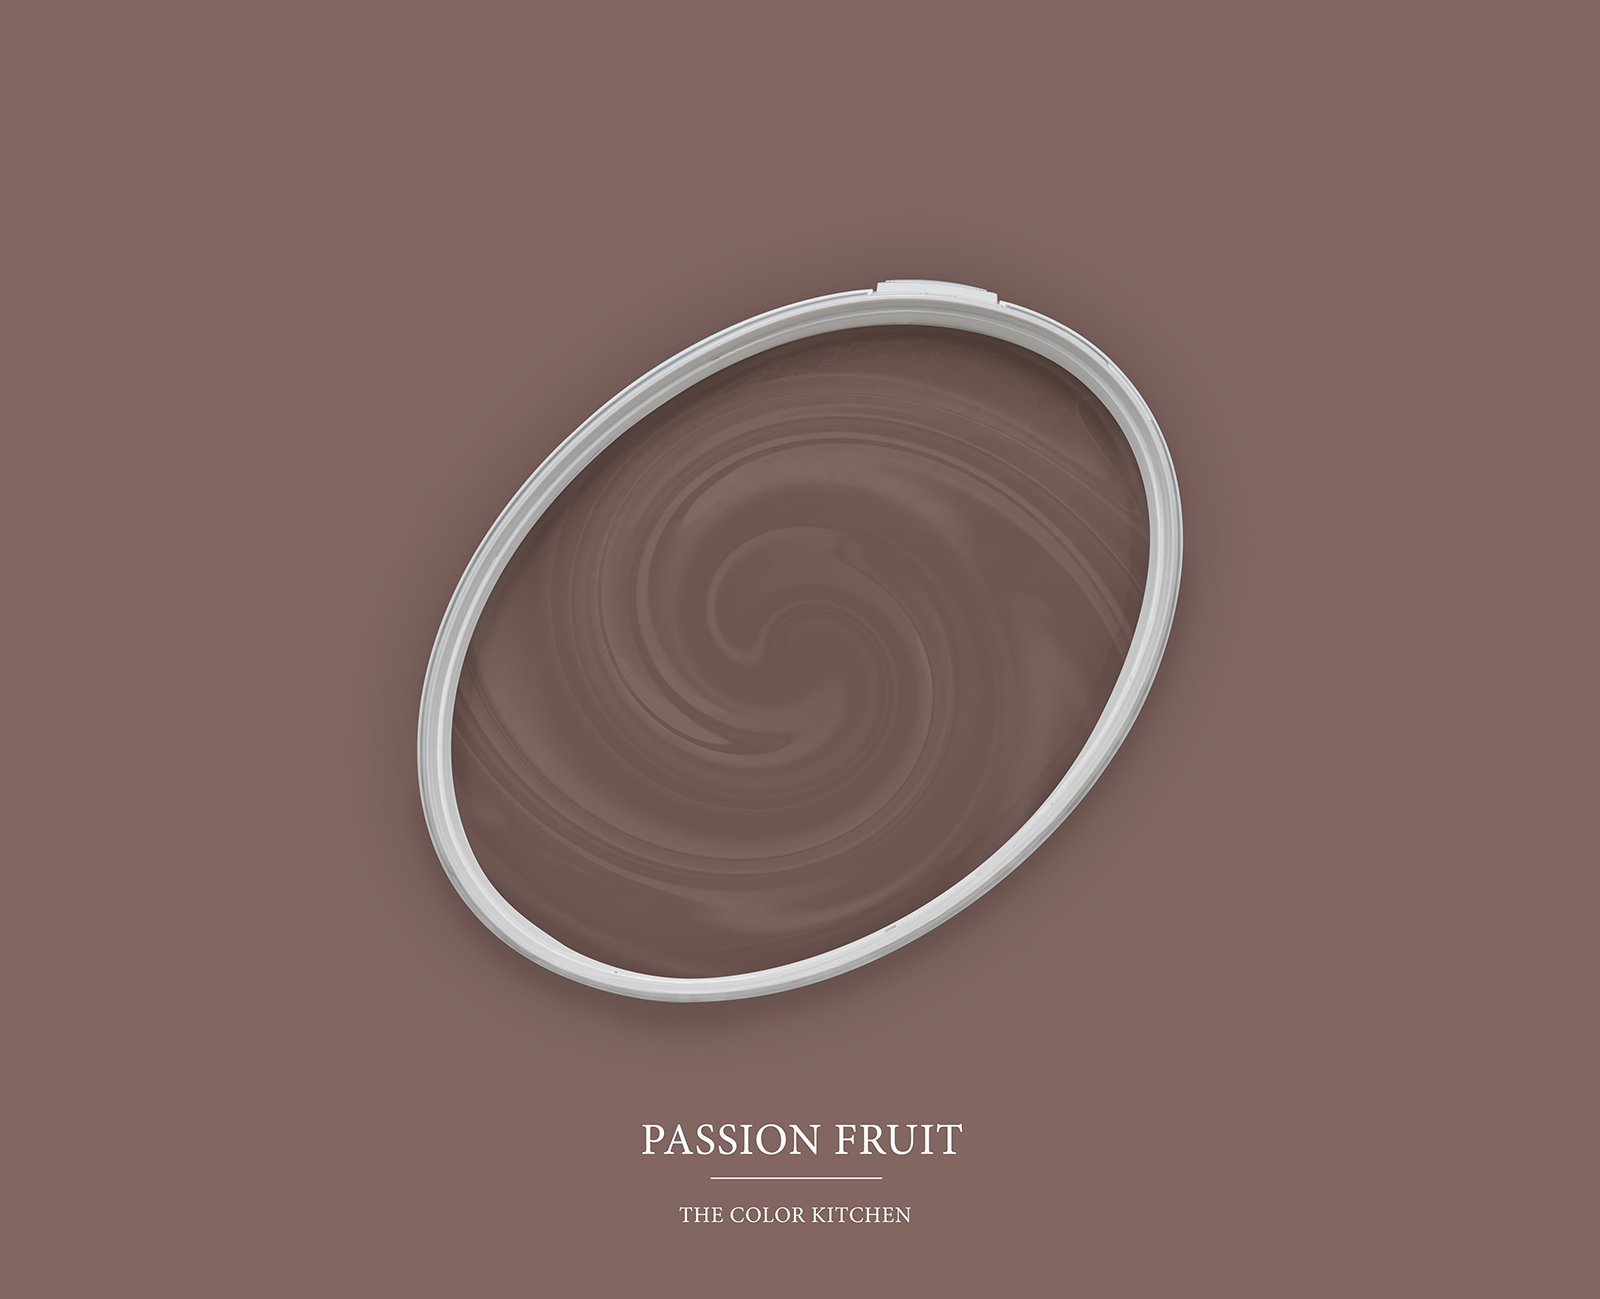 Wall Paint TCK5015 »Passion Fruit« in reddish brown – 5.0 litre
